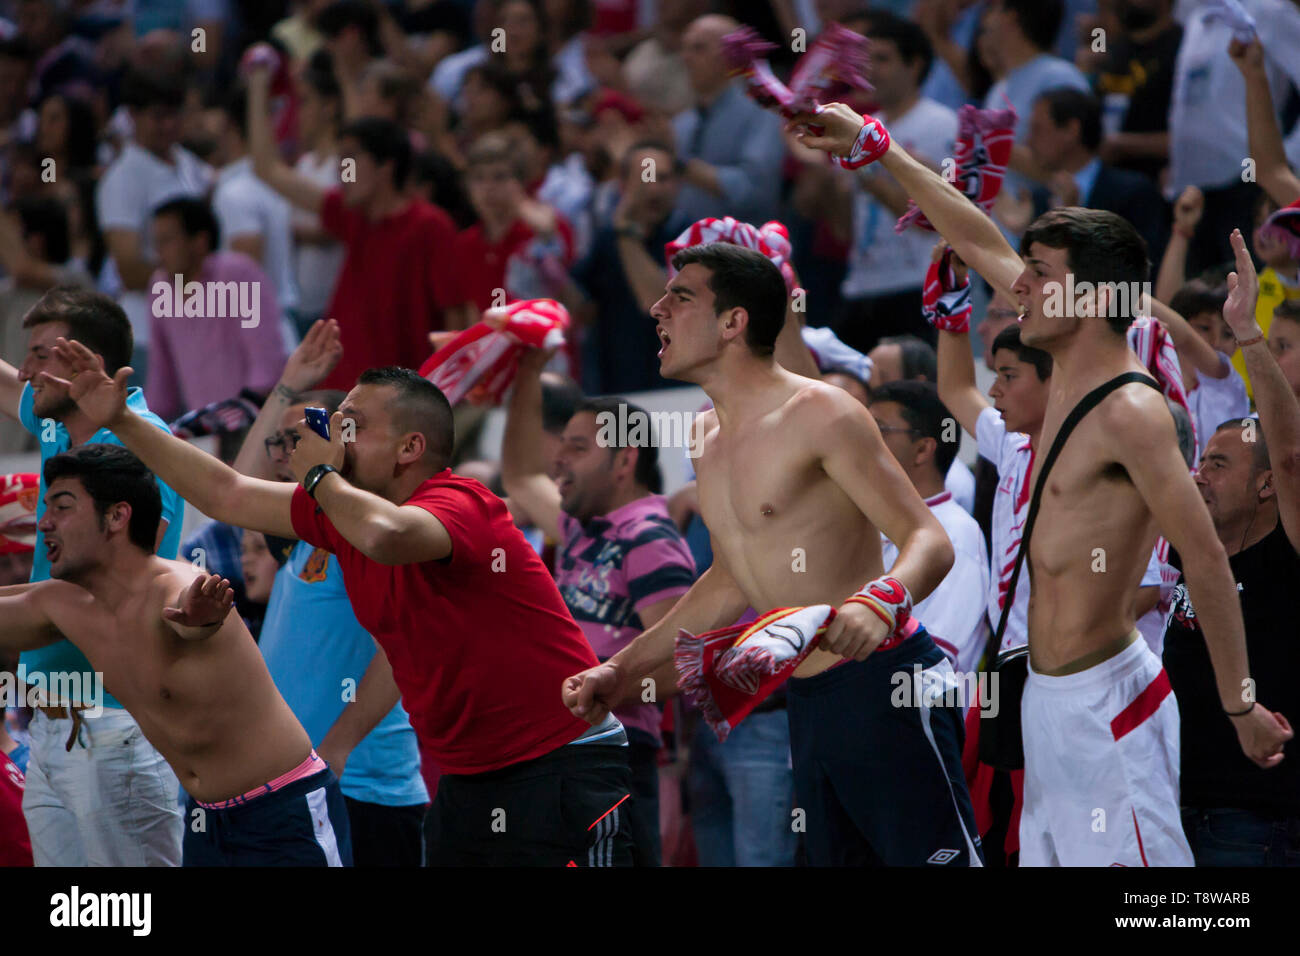 Supporters ofof Sevilla F.C. celebrate during the match of Europa League (quarterfinal 2nd leg) between Sevilla F.C. and F.C. Porto at the Ramon Sanchez Pizjuan Stadium on April 10, 2014 in Seville, Spain Stock Photo